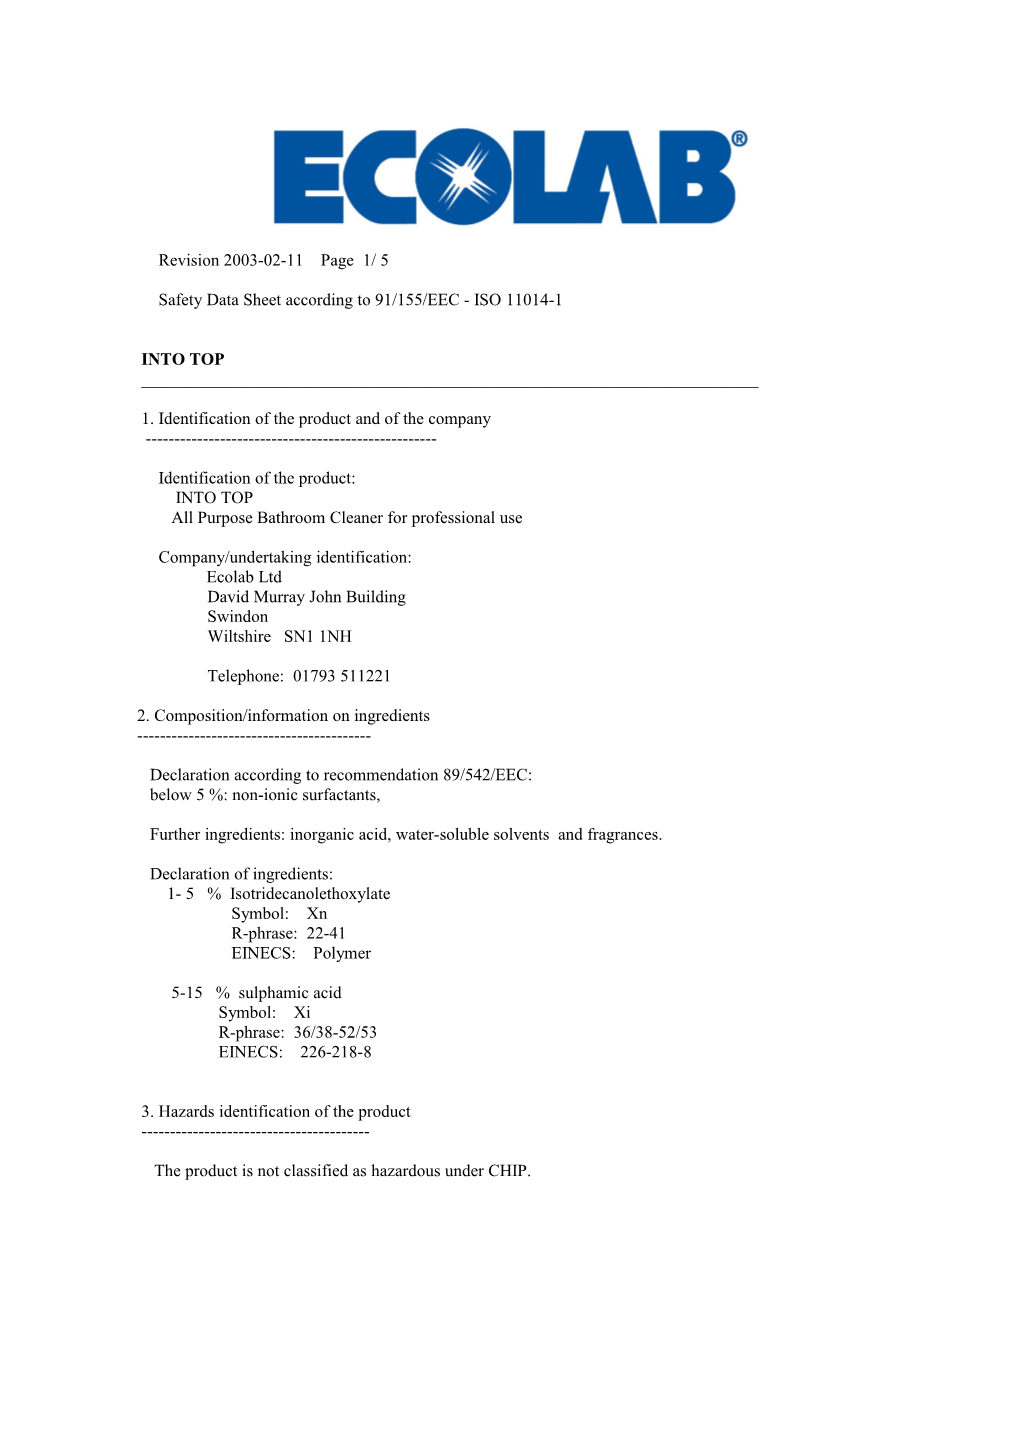 Safety Data Sheet According to 91/155/EEC - ISO 11014-1 s1